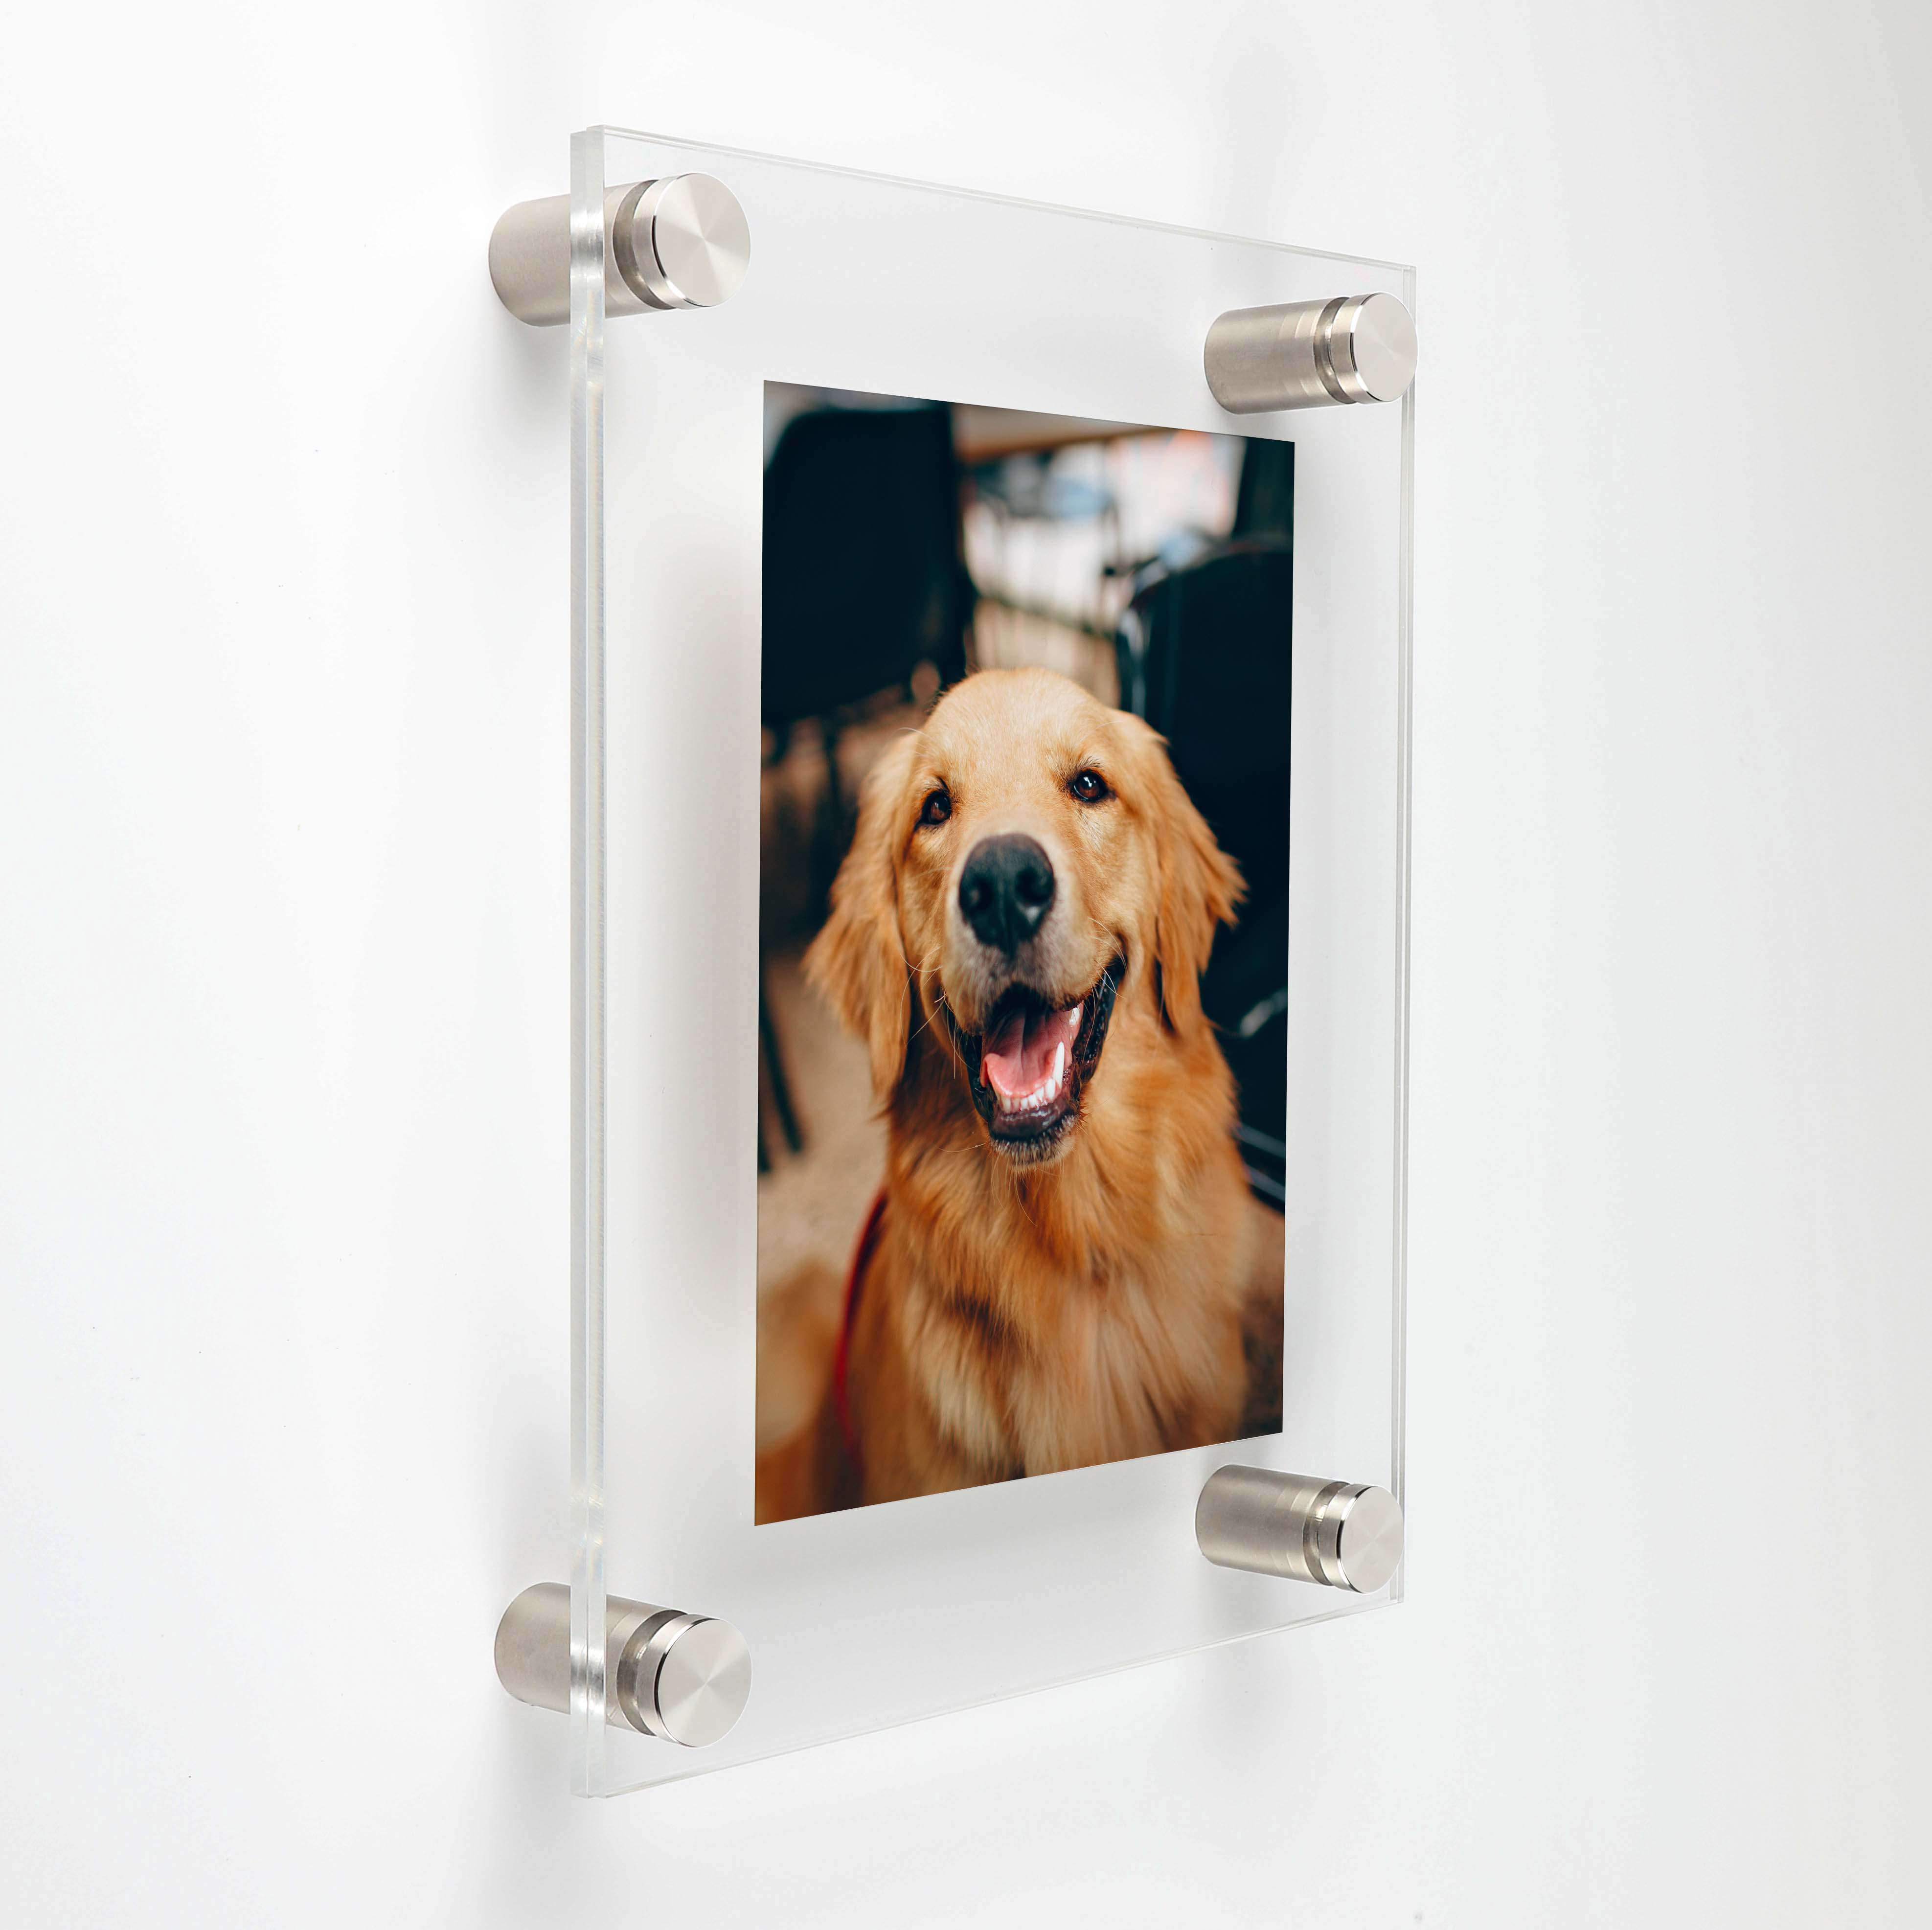 (2) 13-1/2'' x 16-1/2'' Clear Acrylics , Pre-Drilled With Polished Edges (Thick 1/8'' each), Wall Frame with (4) 3/4'' x 3/4'' Brushed Stainless Steel Standoffs includes Screws and Anchors